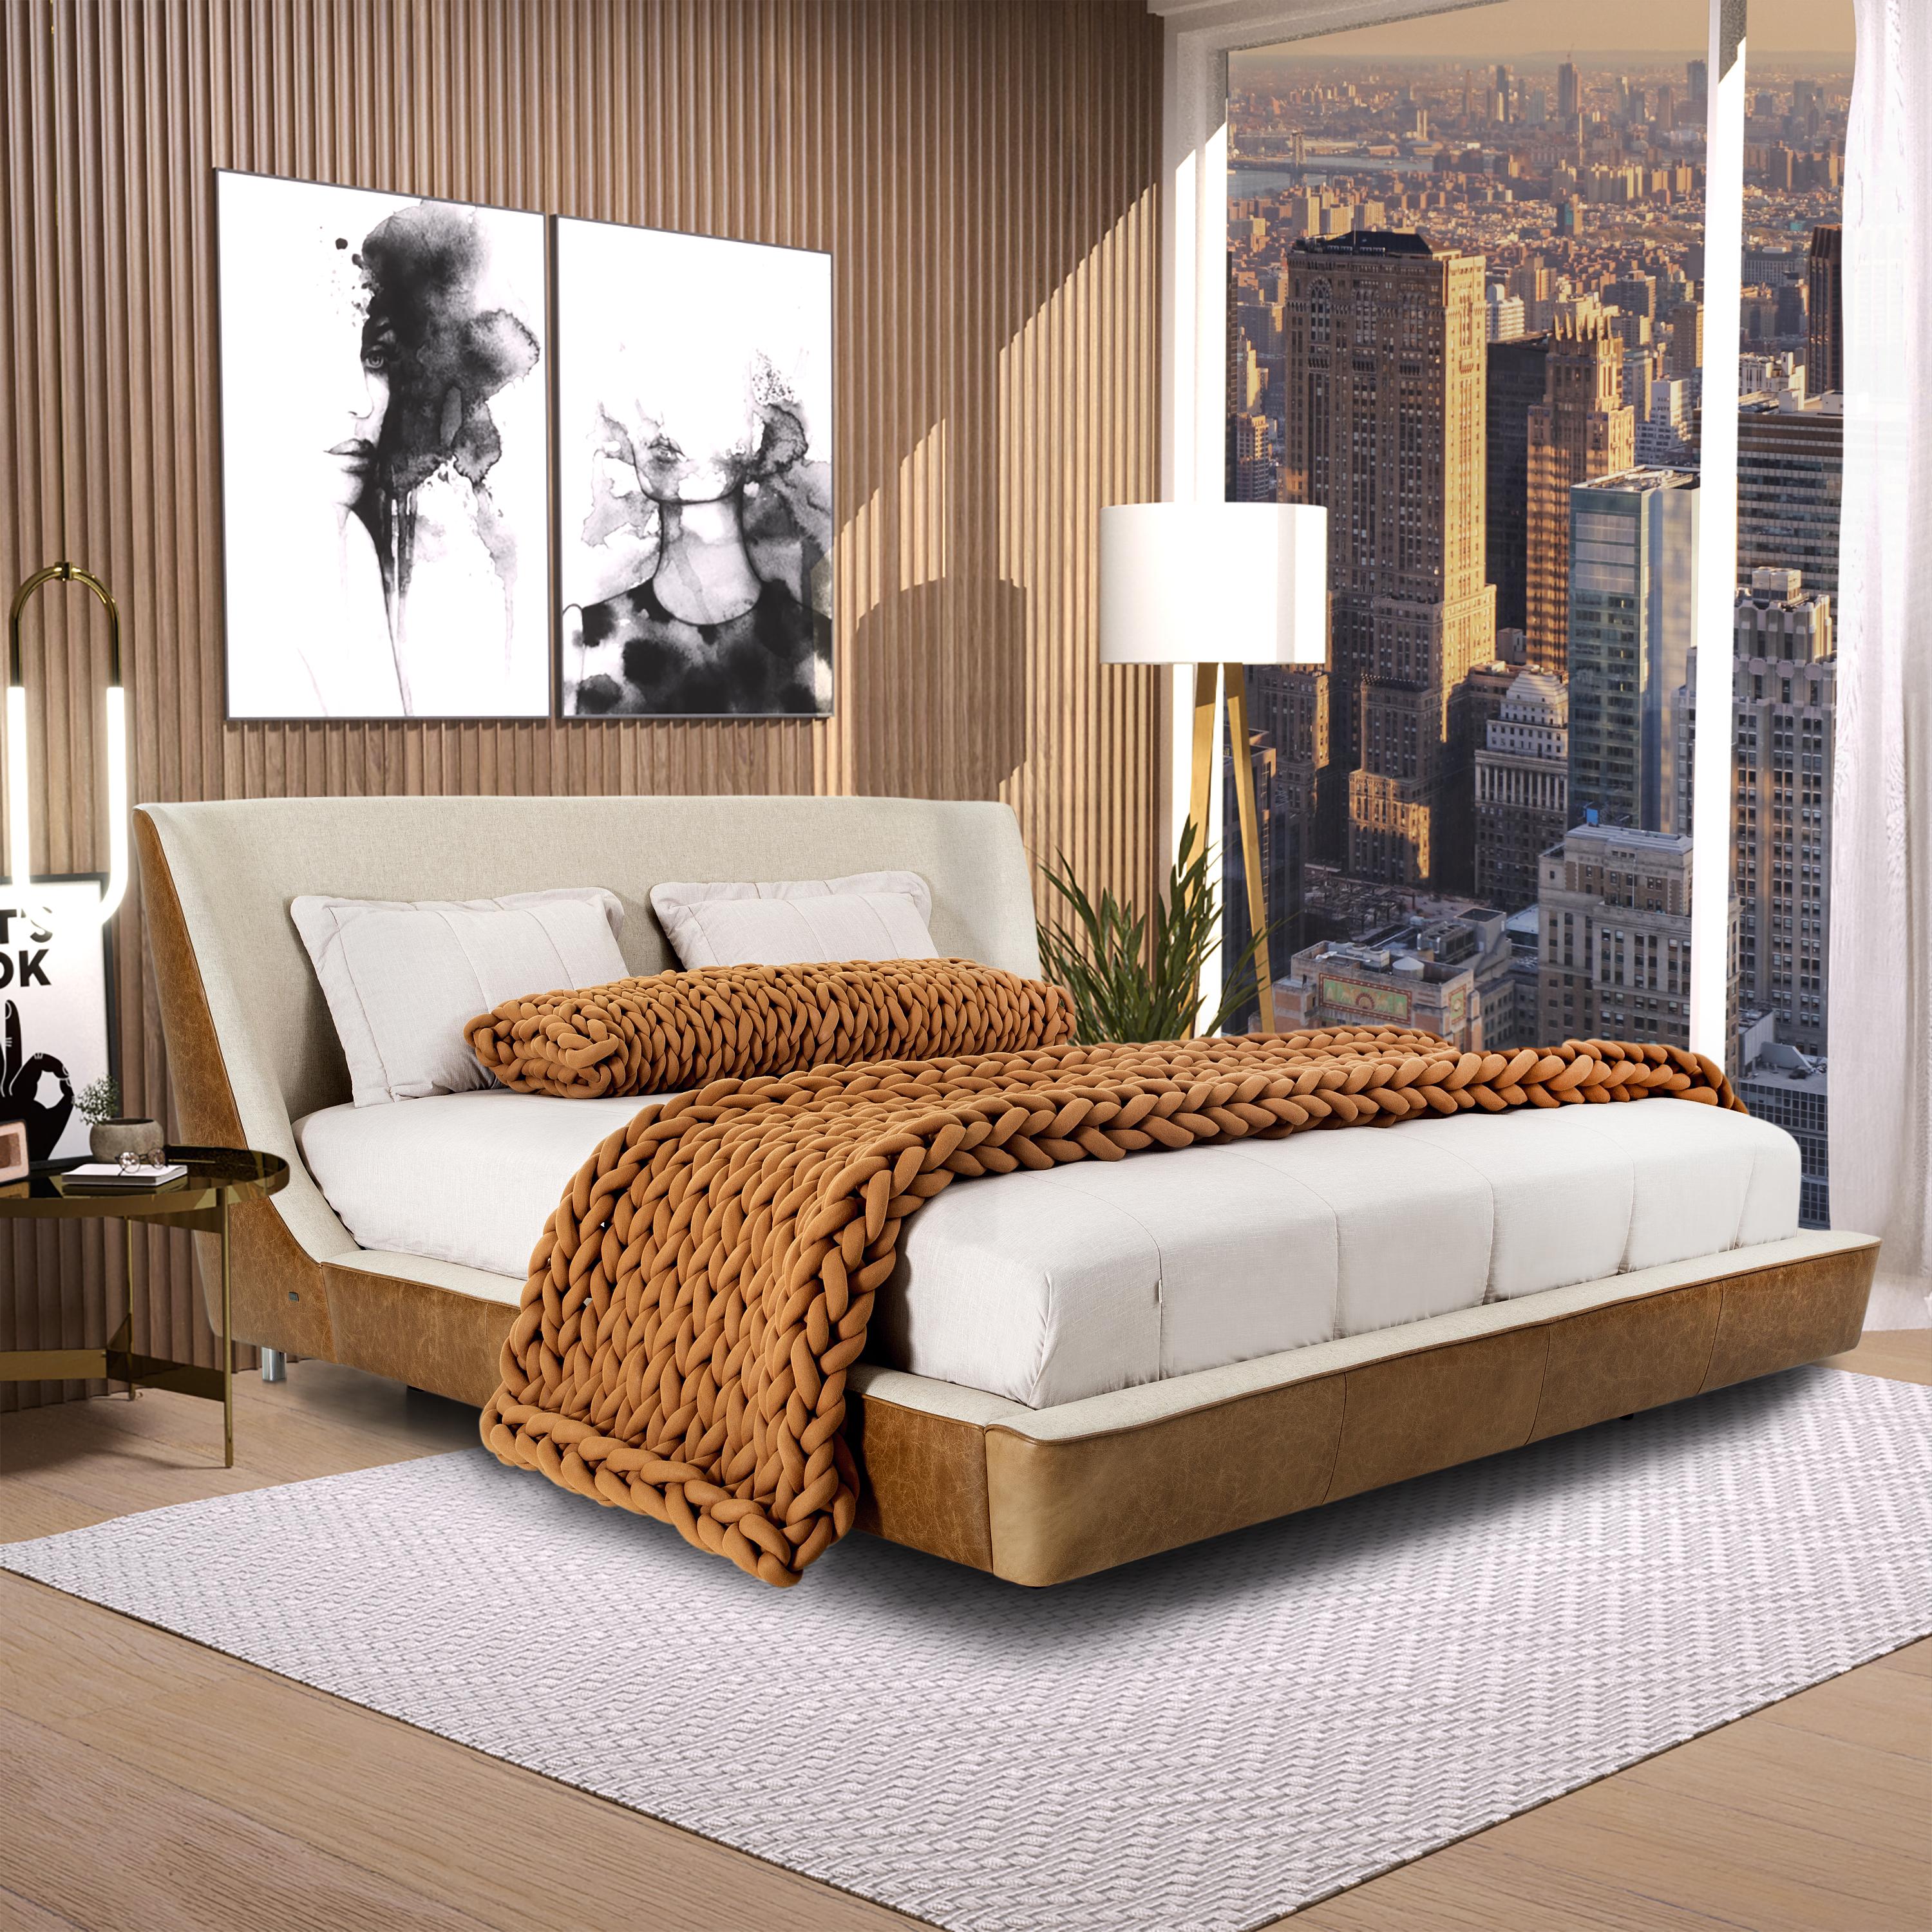 The amazing designers from the Uultis team have fabricated this beautiful Musa king bed in an exquisite combination of oatmeal fabric and brown leather, with a shell shape as a headboard that is supported by an angular frame, covered with foam and